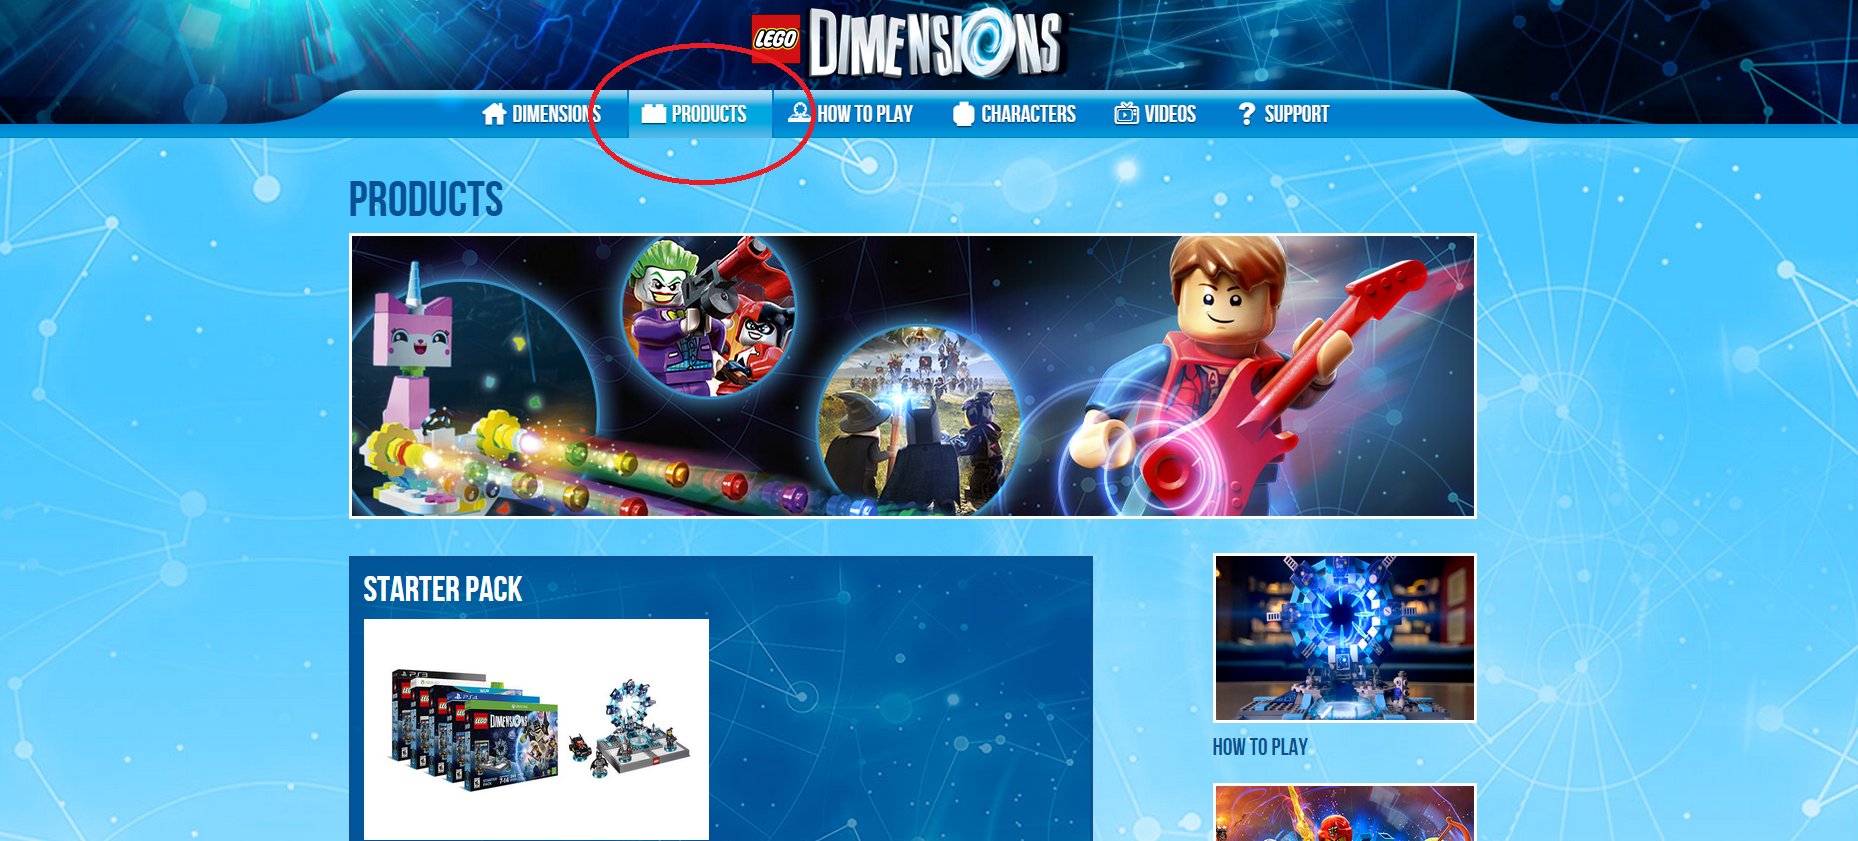 LEGO Dimensions Instructions be Available for Everyone